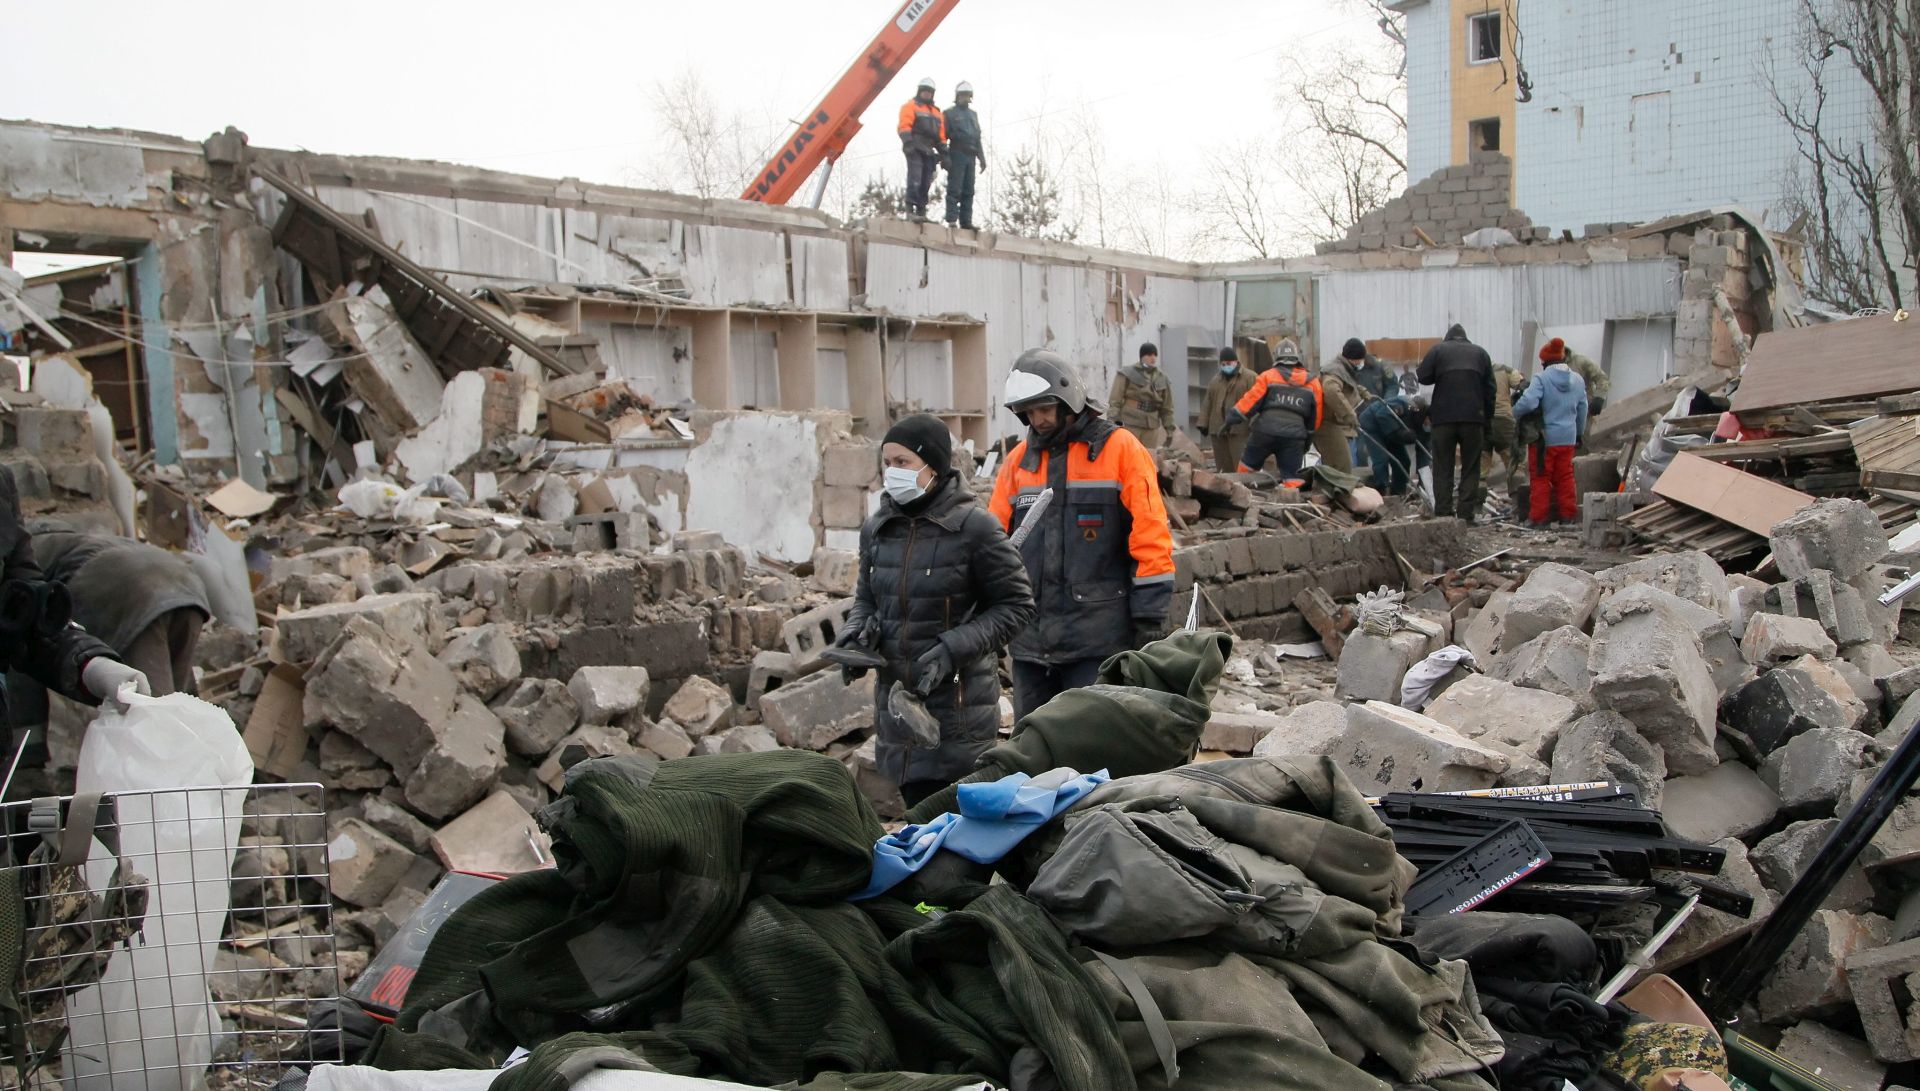 epa05768873 Rescue workers pull down a building damaged in shelling in the pro-Russia rebel controlled city of Donetsk, Ukraine, 03 February 2017. According to media reports, Ukrainian officials have denied that the Ukrainian army fired on the Russian-occupied city of Donetsk.  EPA/ALEXANDER ERMOCHENKO